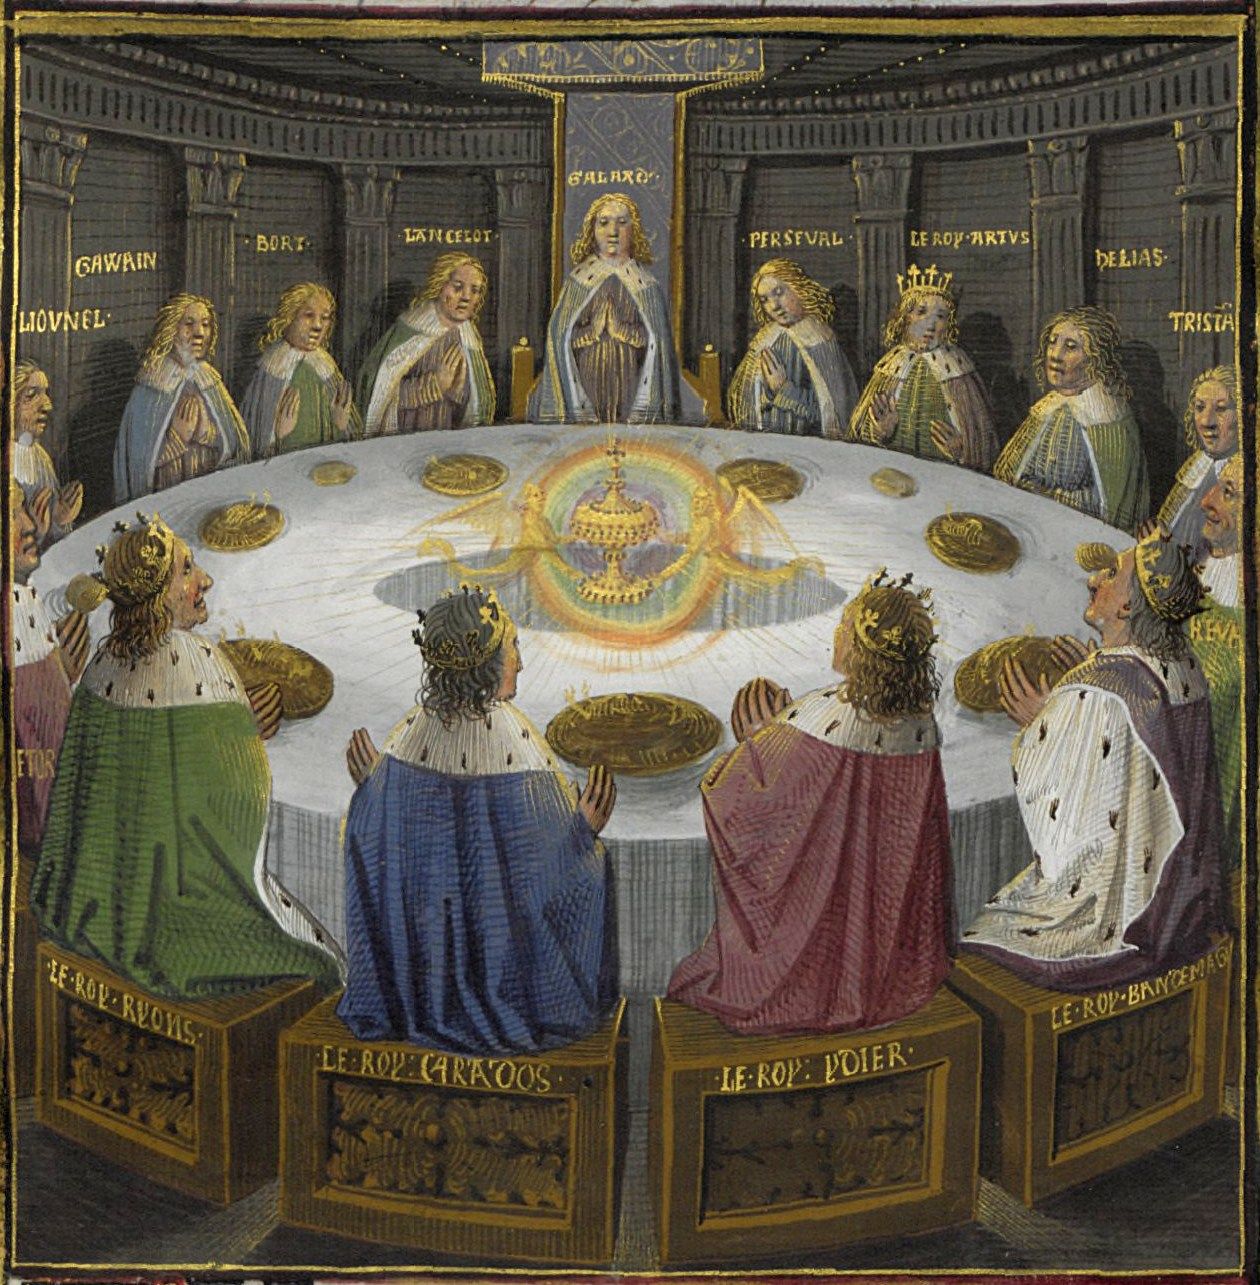 An illustration of King Arthur’s knights at the round table seeing a vision of the holy grail